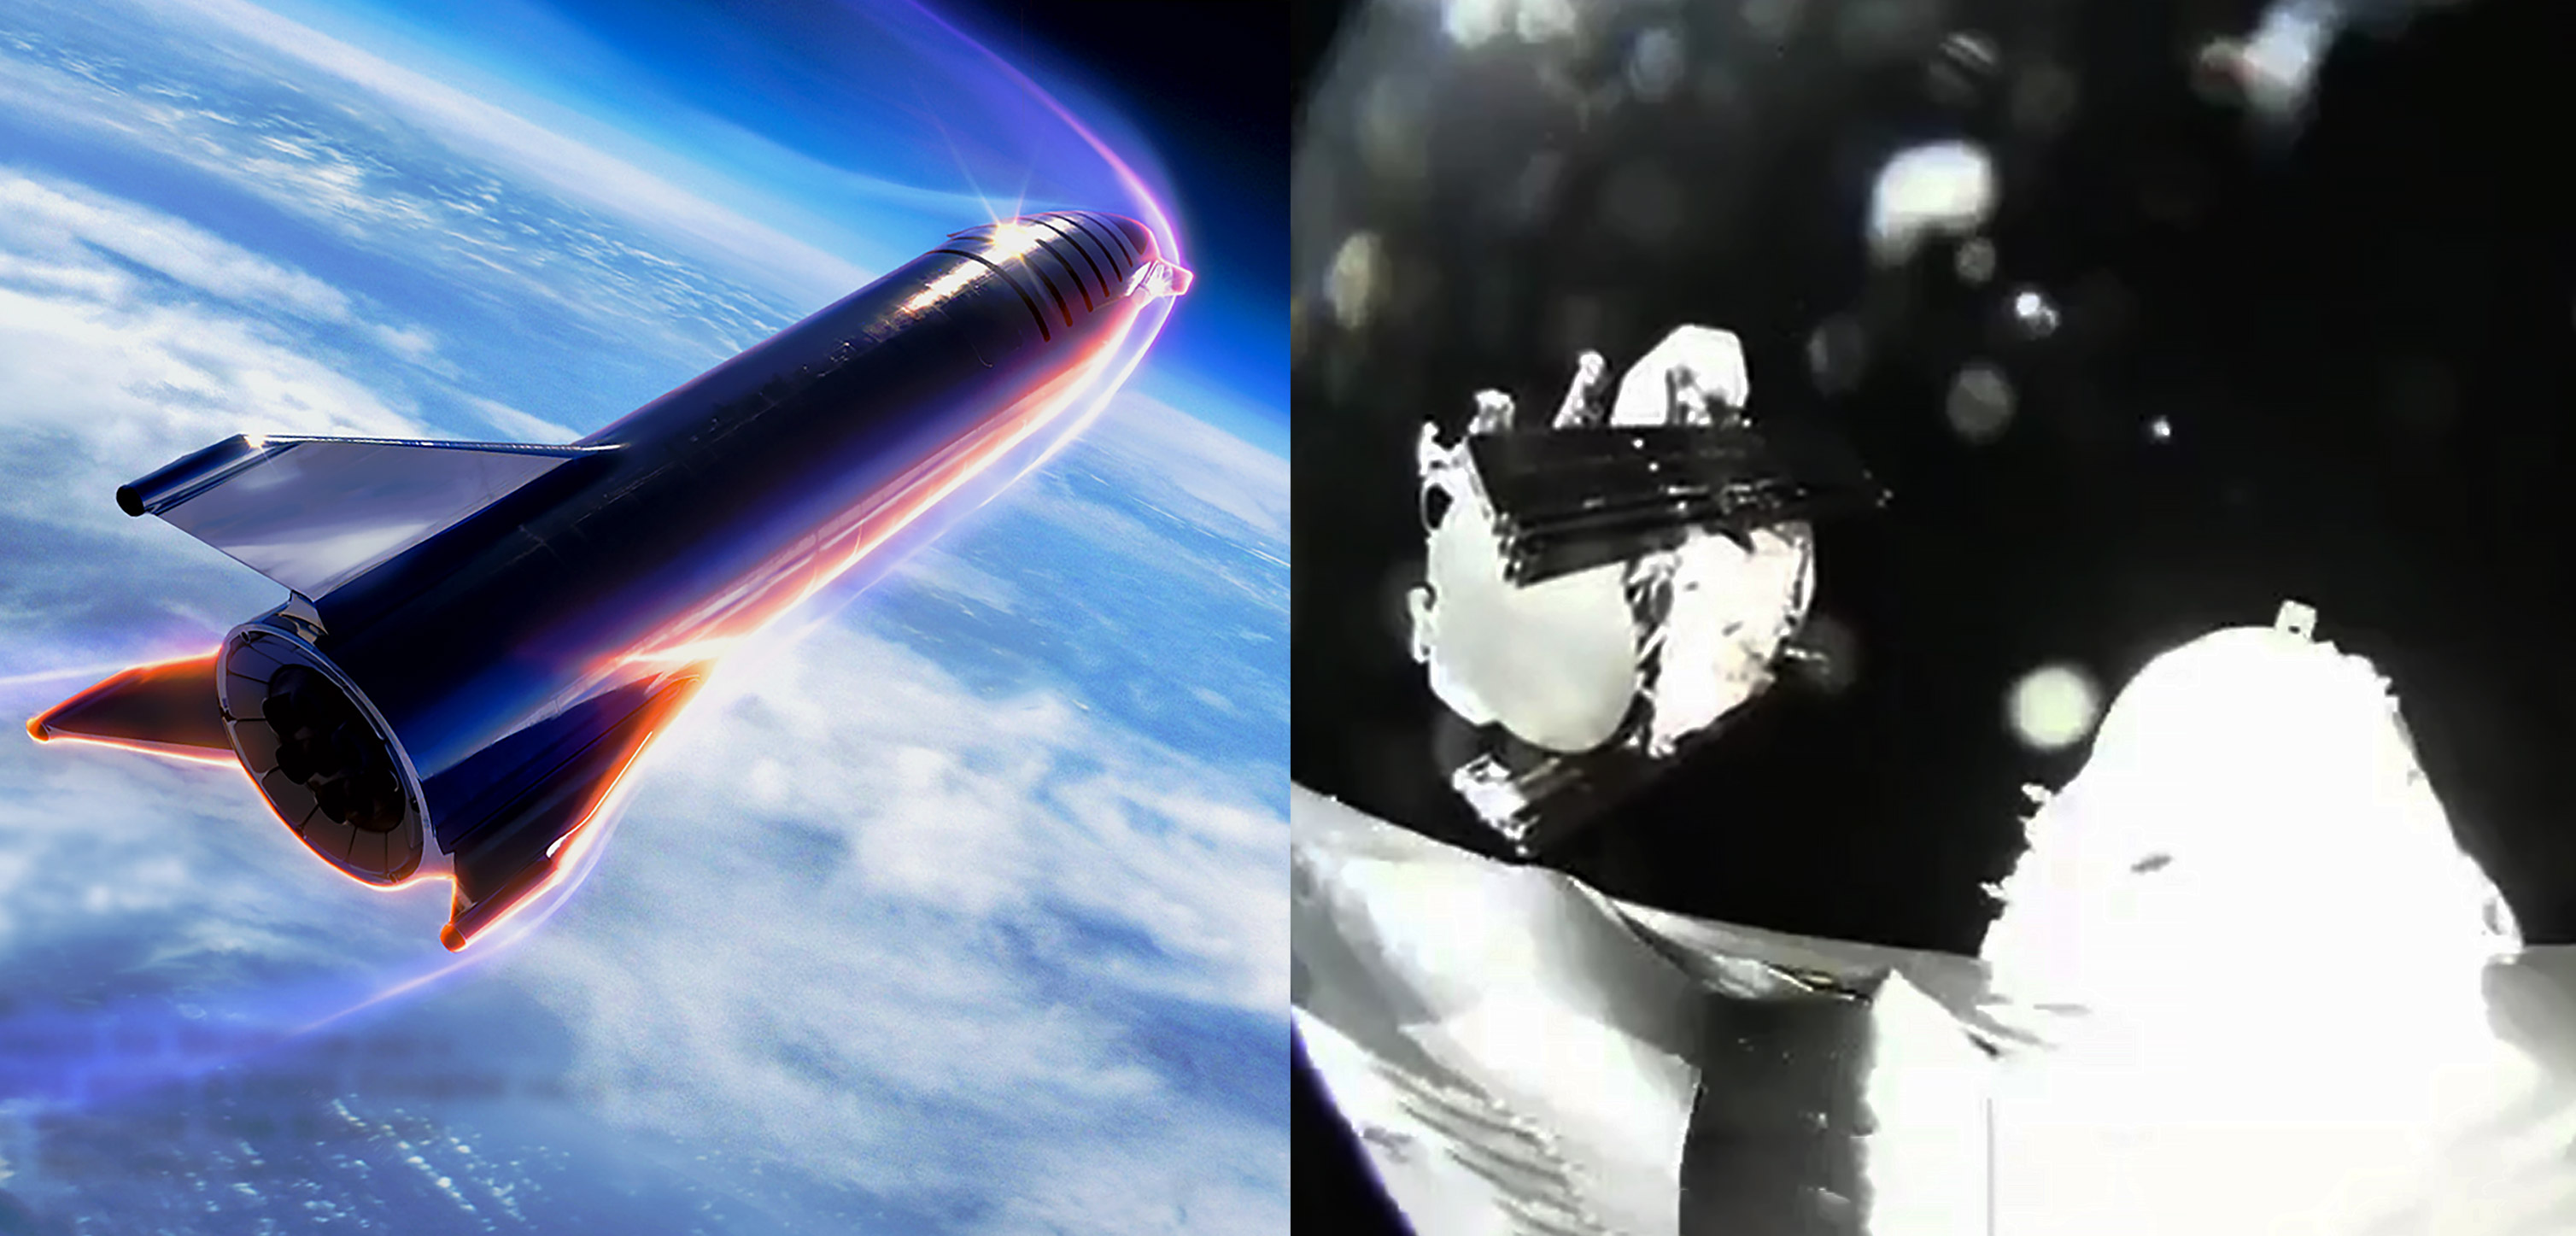 Starship and Starlink (SpaceX) 2